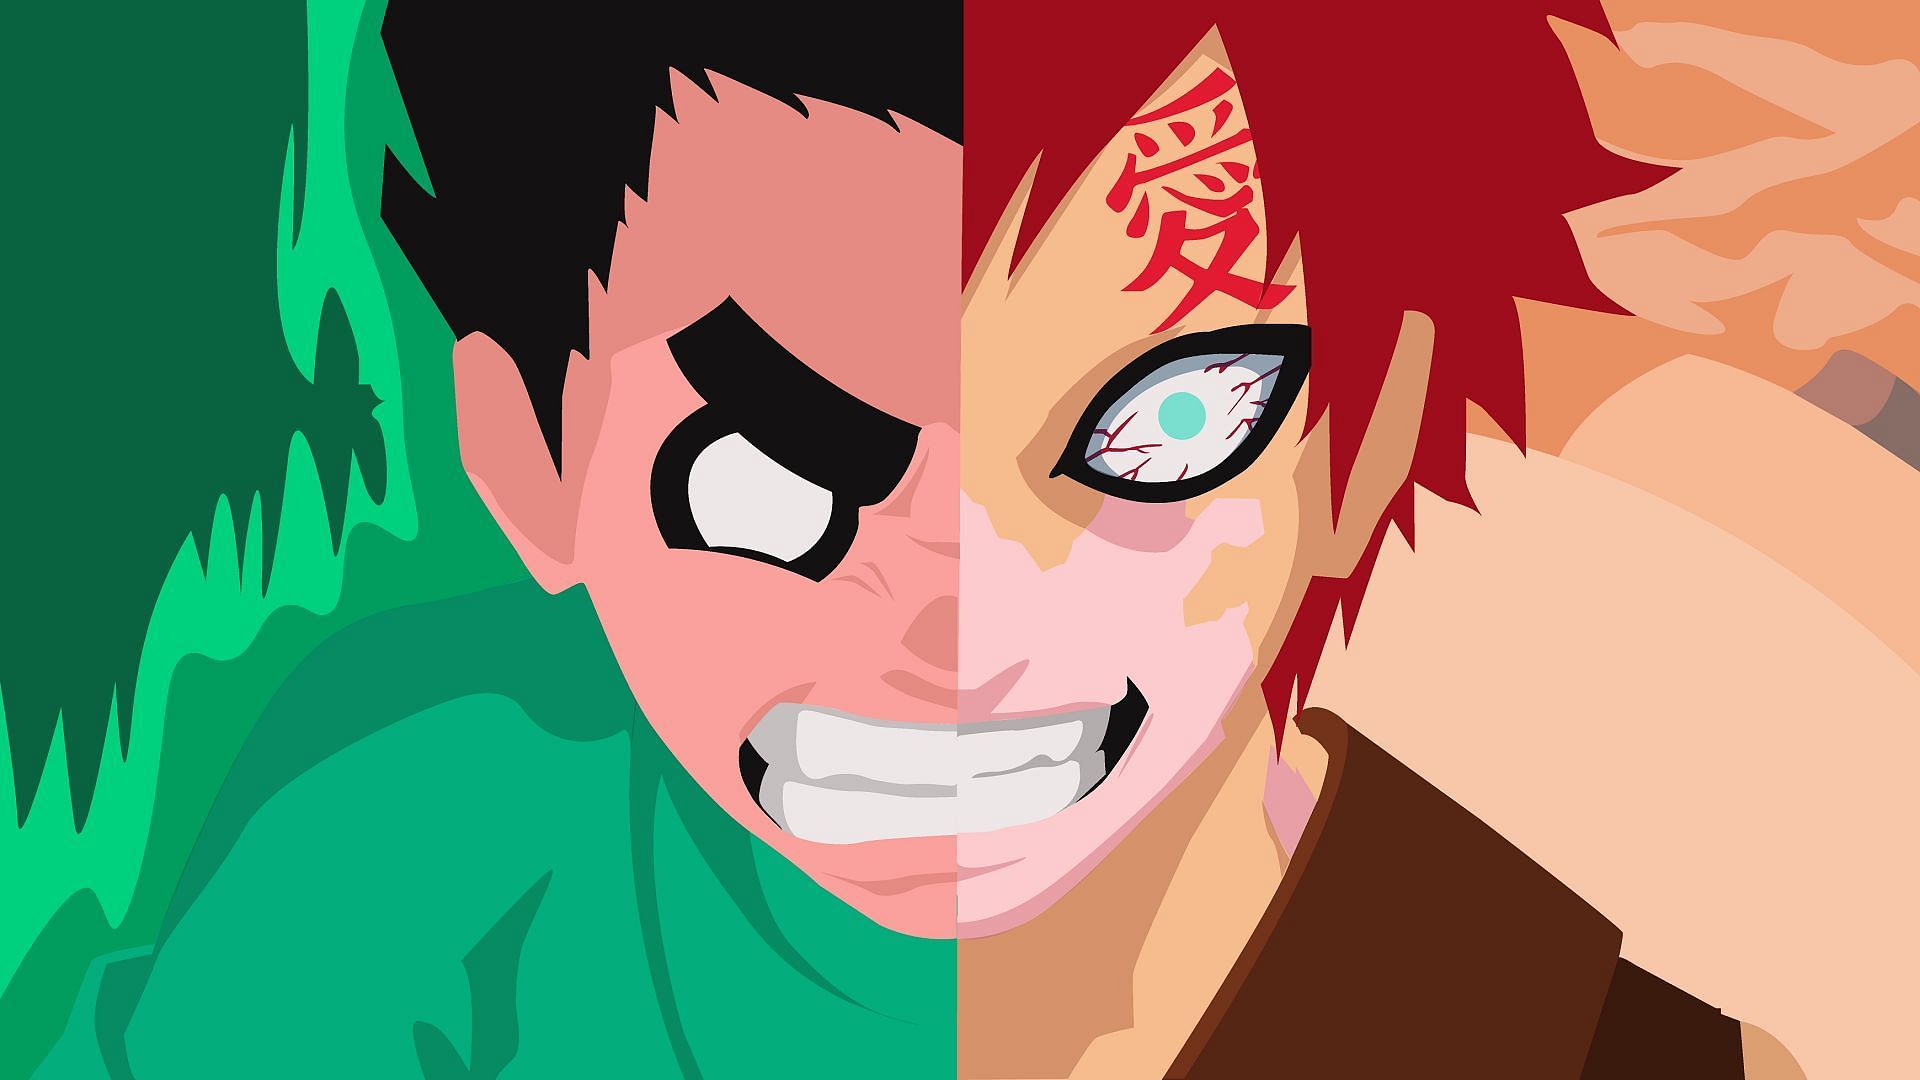 Rock Lee vs Gaara is widely considered one of the best fights in the entire Naruto series (Image via Masashi Kishimoto/Shueisha/Studio Pierrot, Naruto)